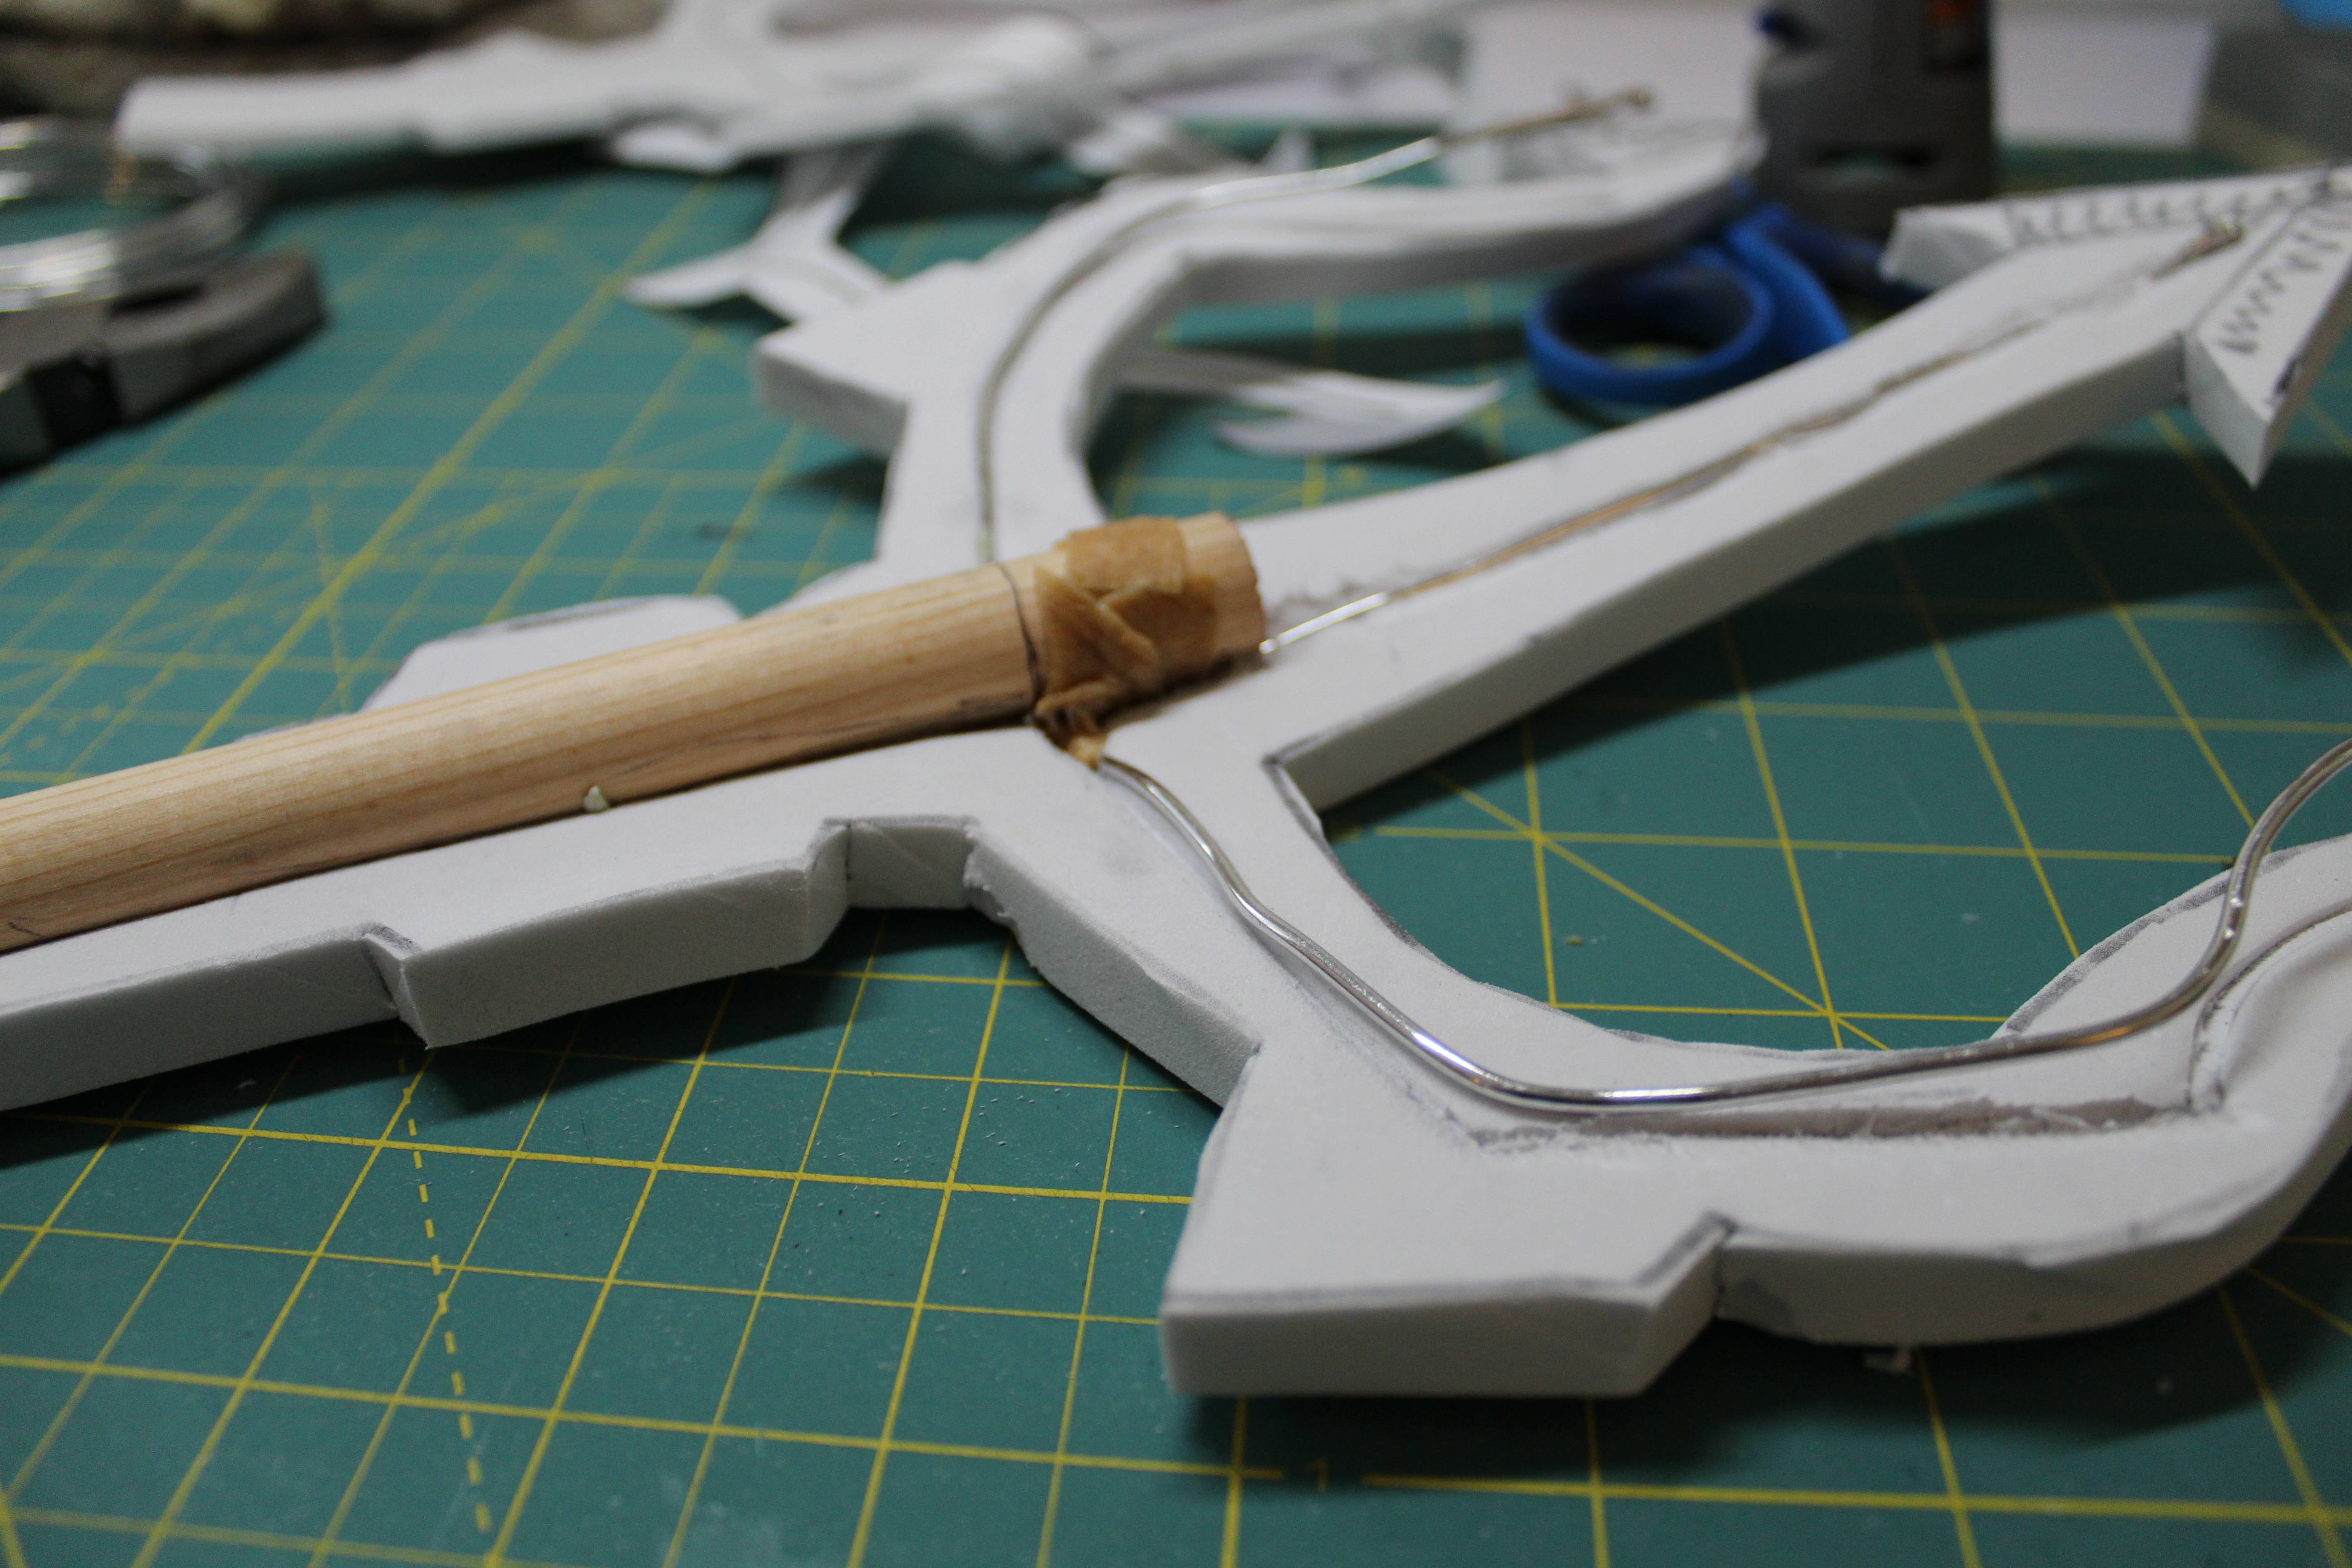 attach the dowel rod to the foam